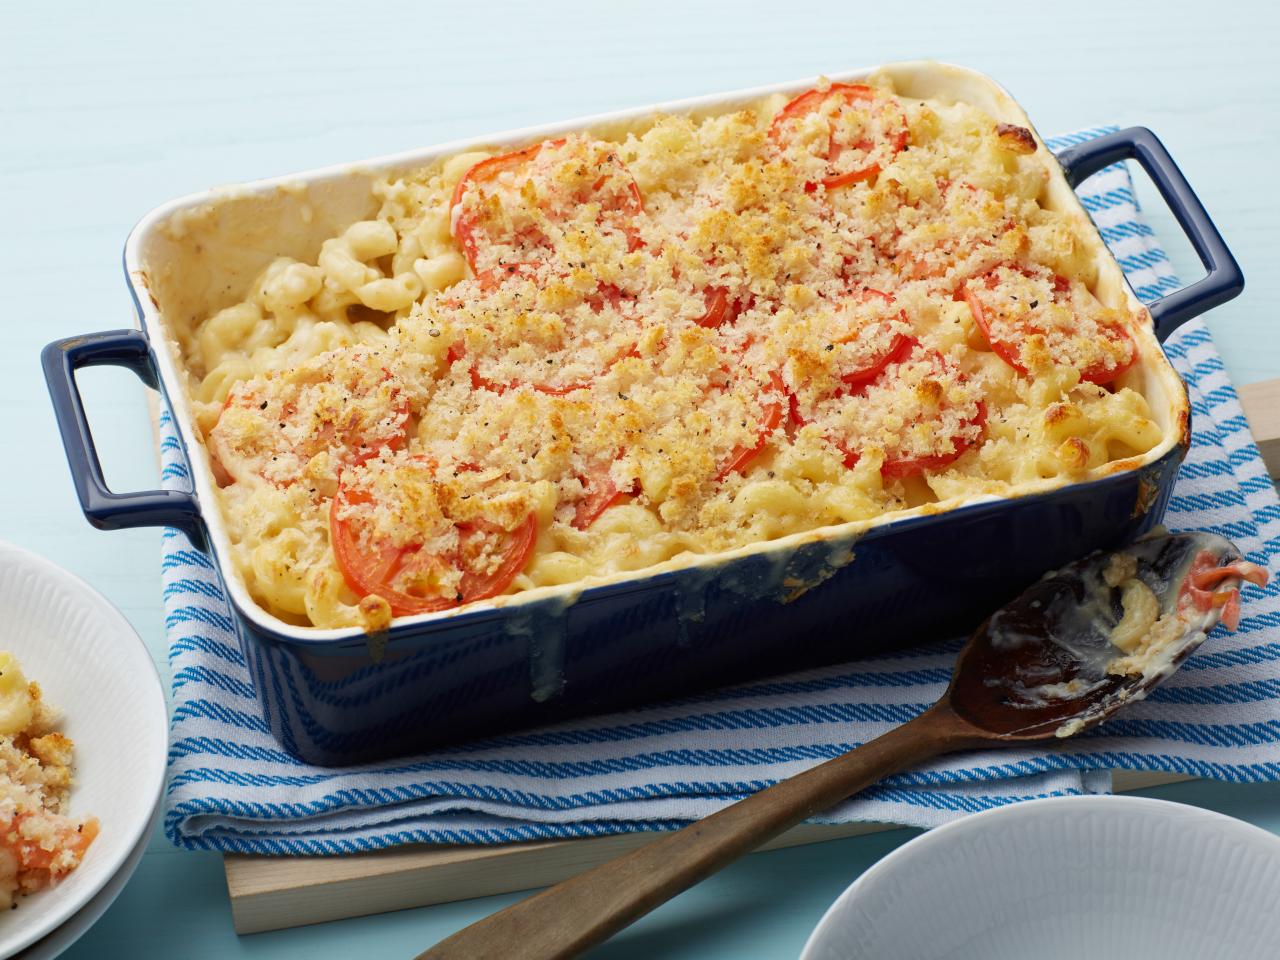 Best 5 Macaroni and Cheese Recipes | FN Dish - Behind-the ...